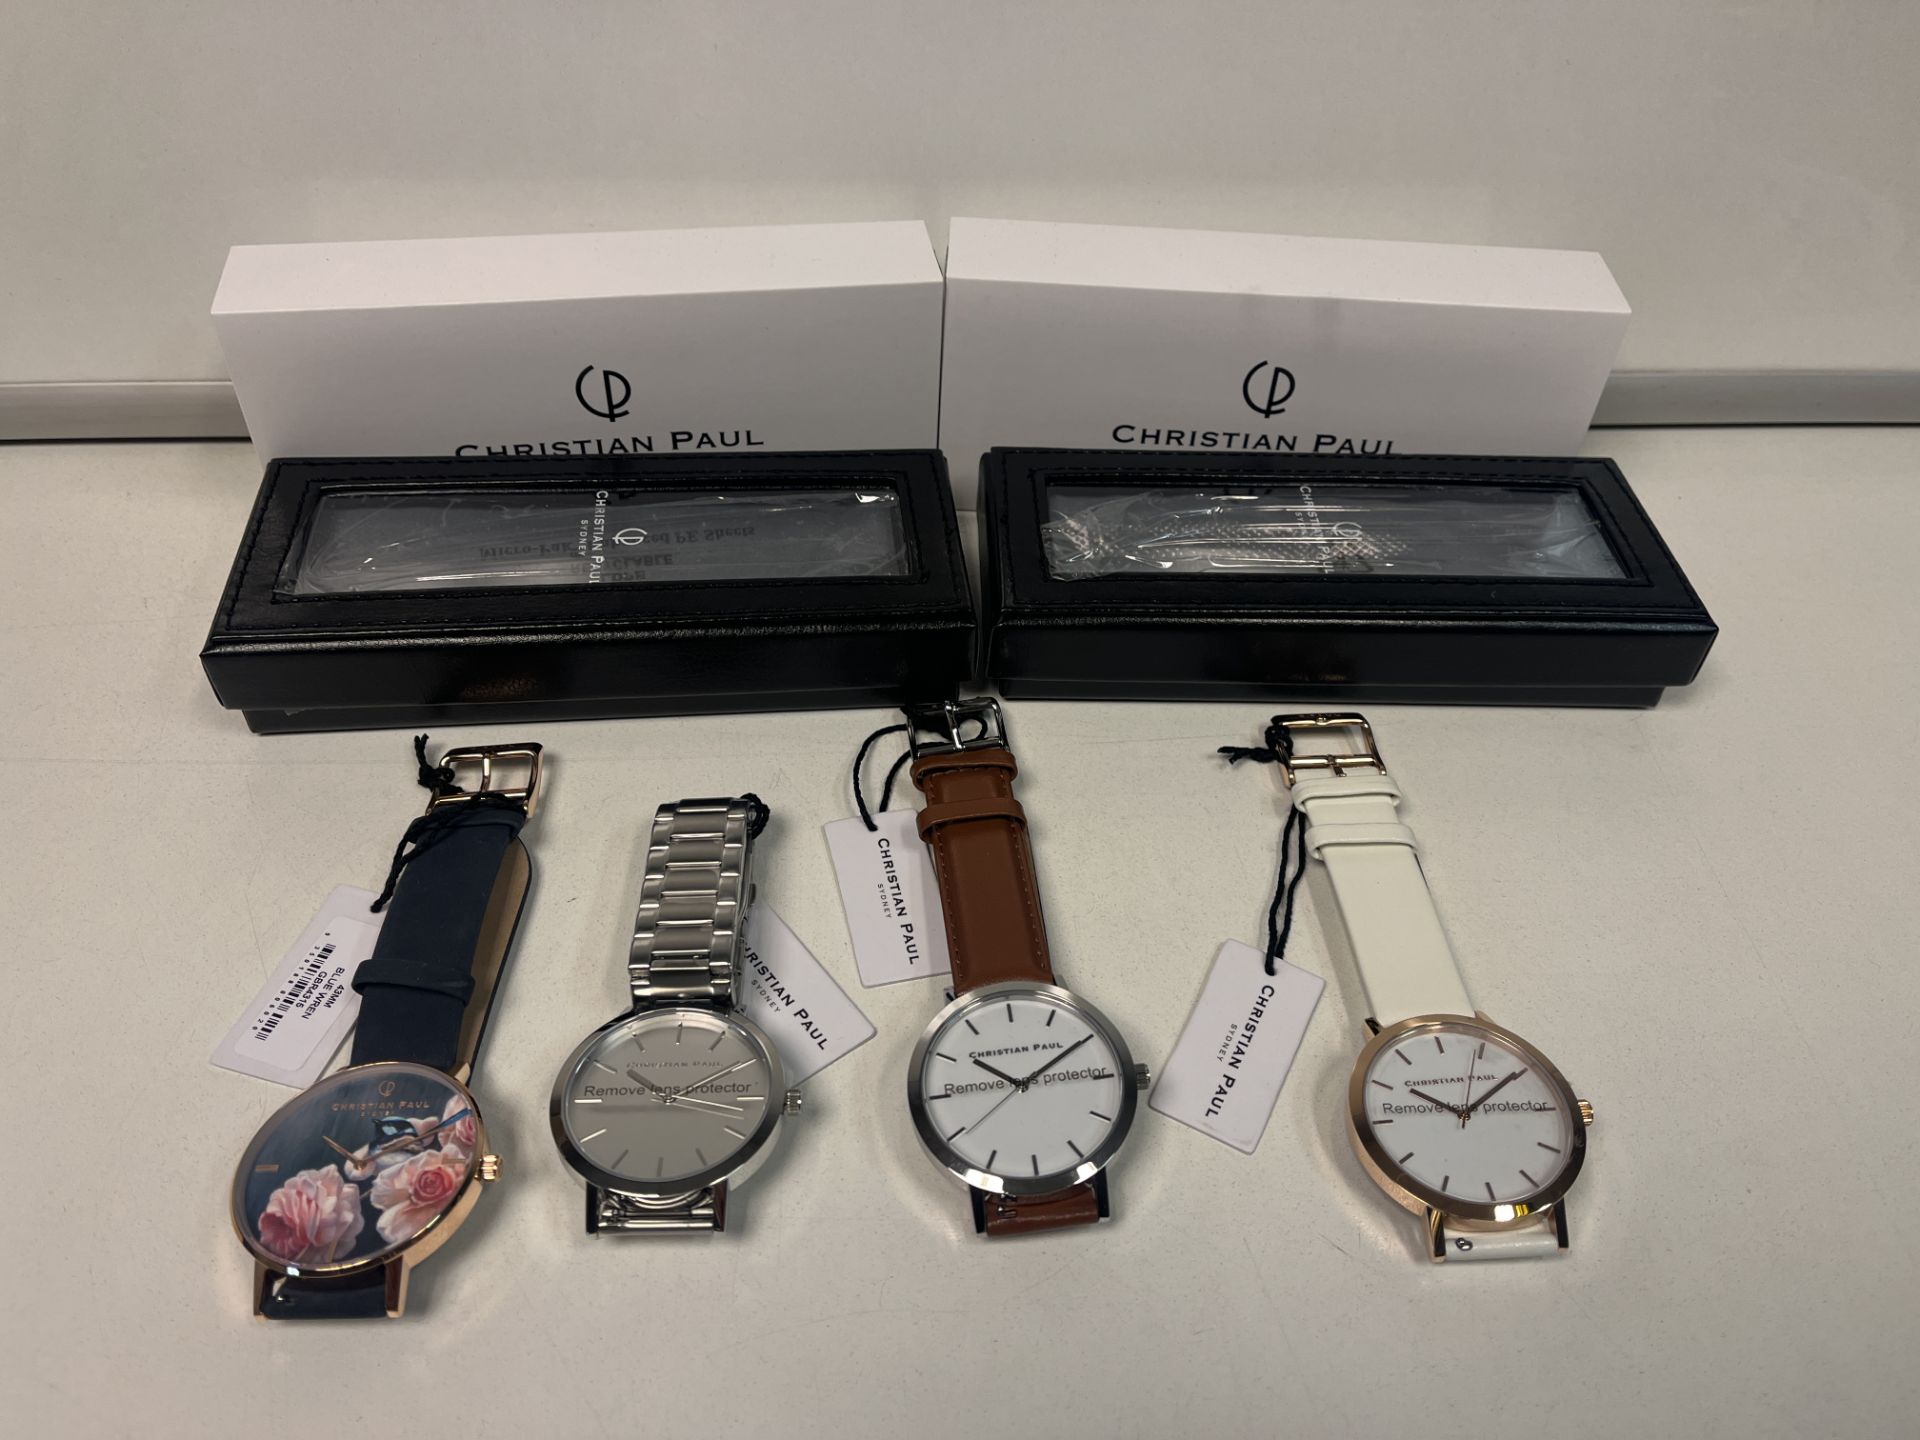 3 X BRAND NEW CHRISTIAN PAUL LUXURY WATCHES IN VARIOUS DESIGNS RRP £99-129 EACH OFF